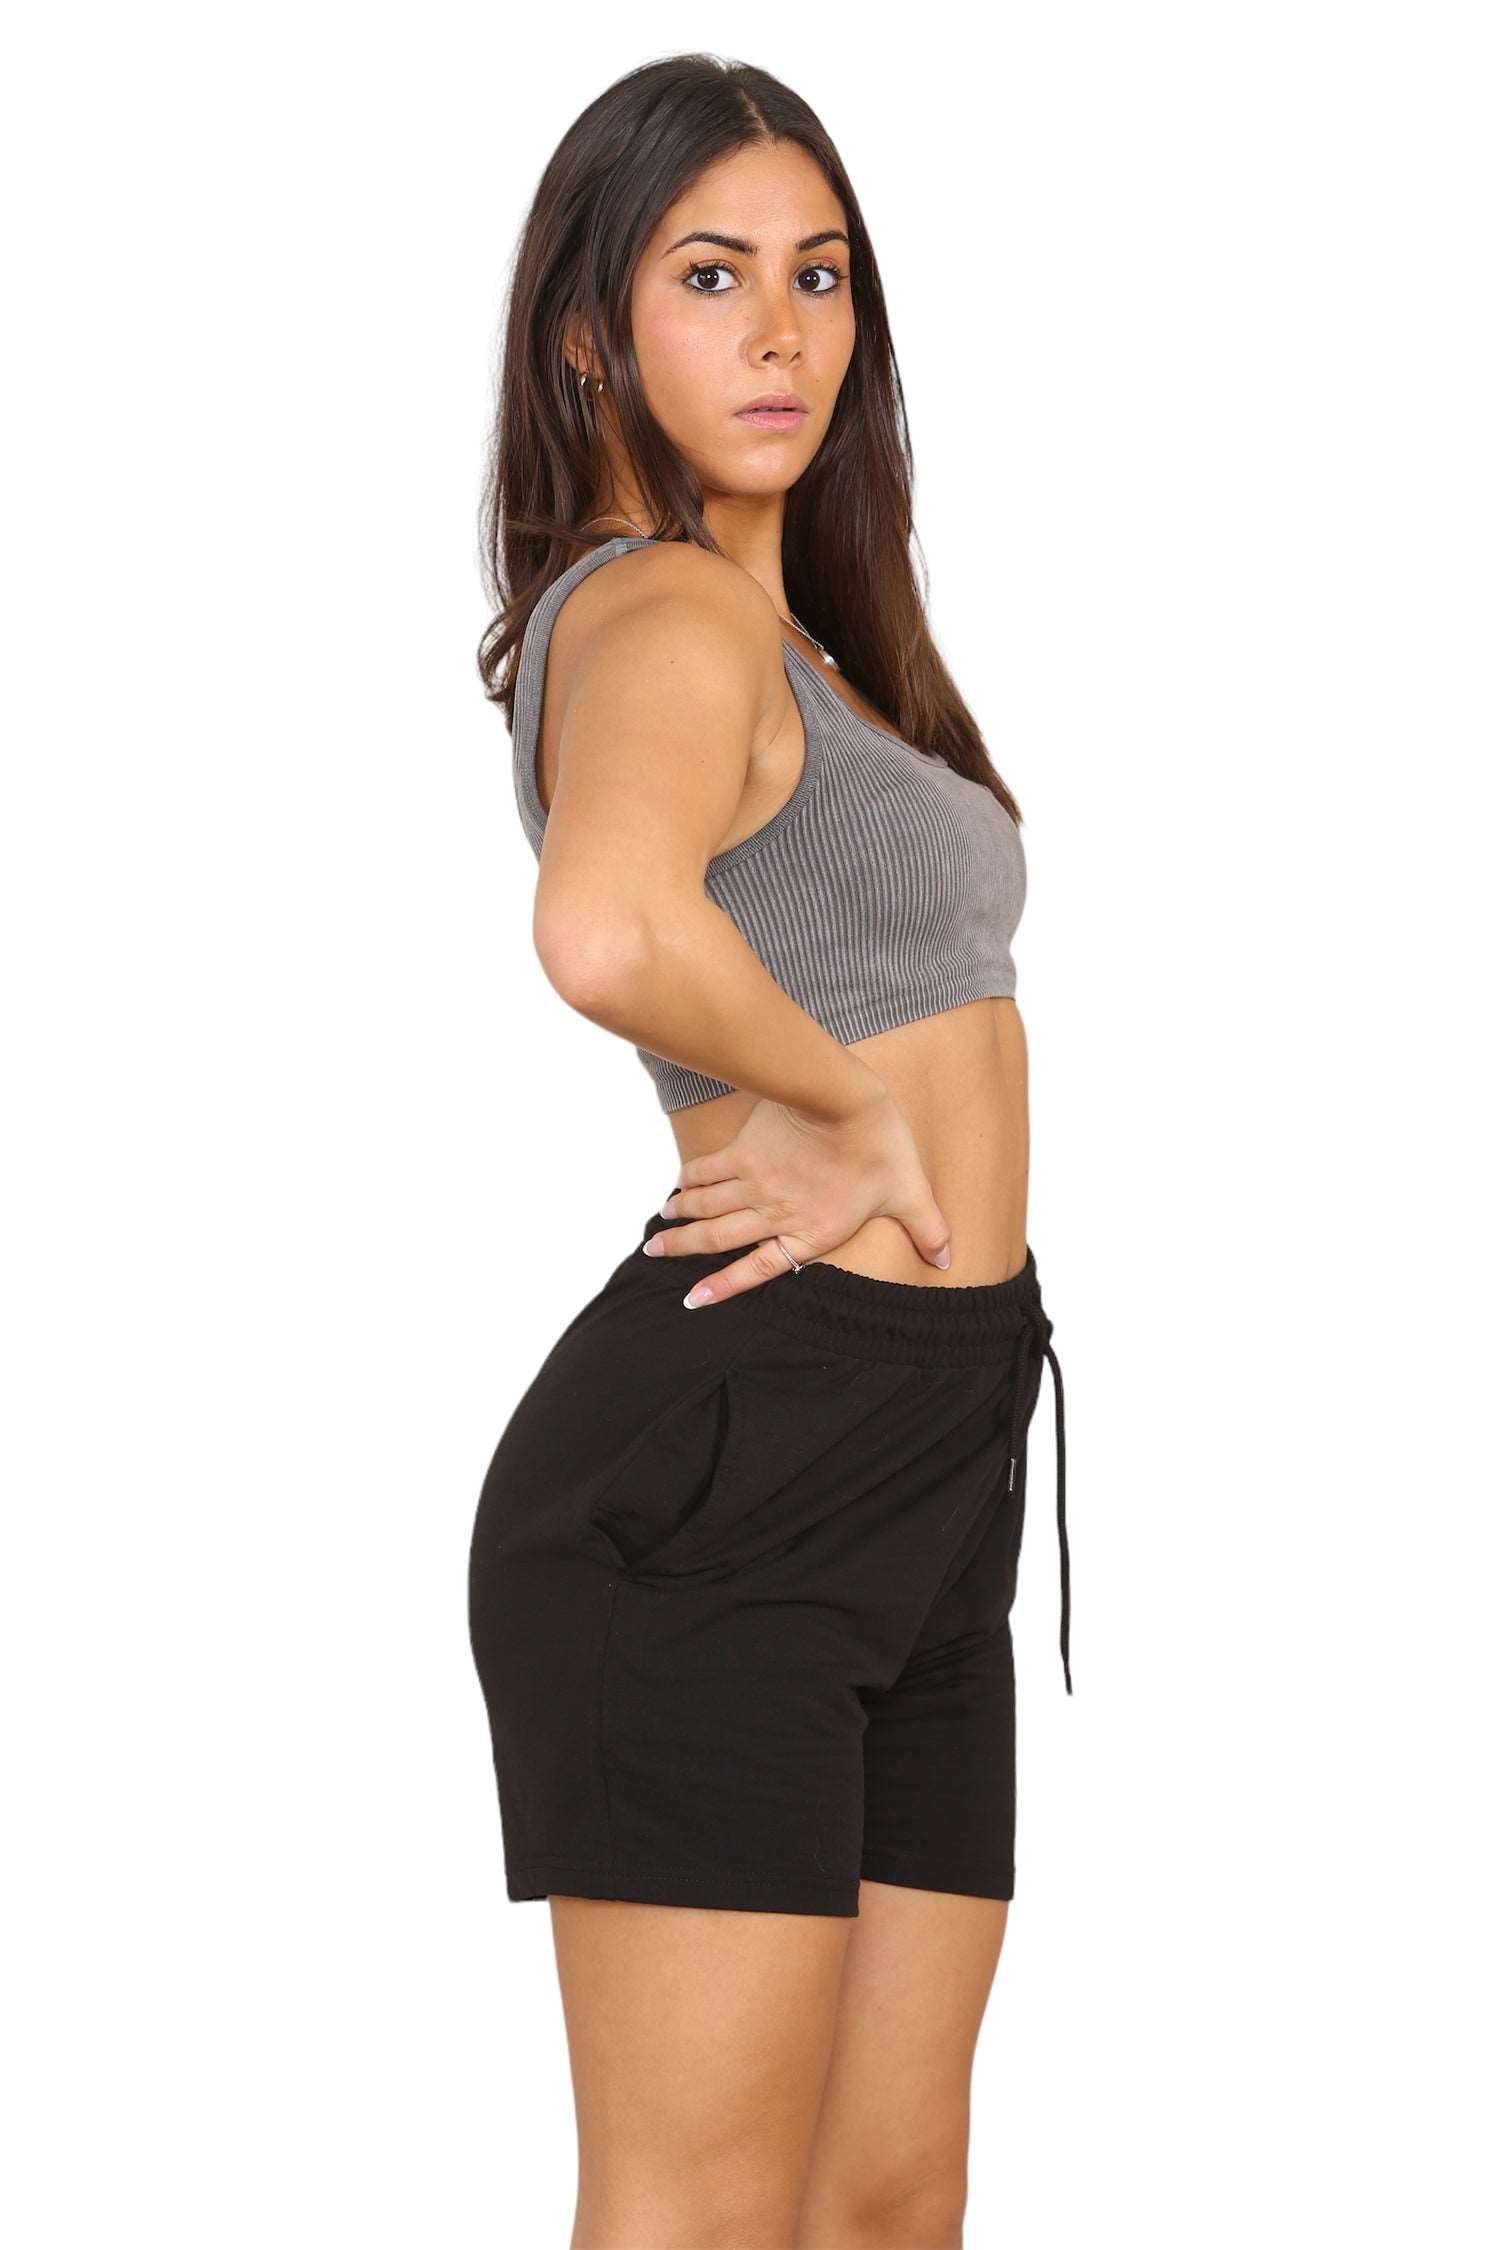 Comfy Mid-Length Black Cycling Shorts for Women!